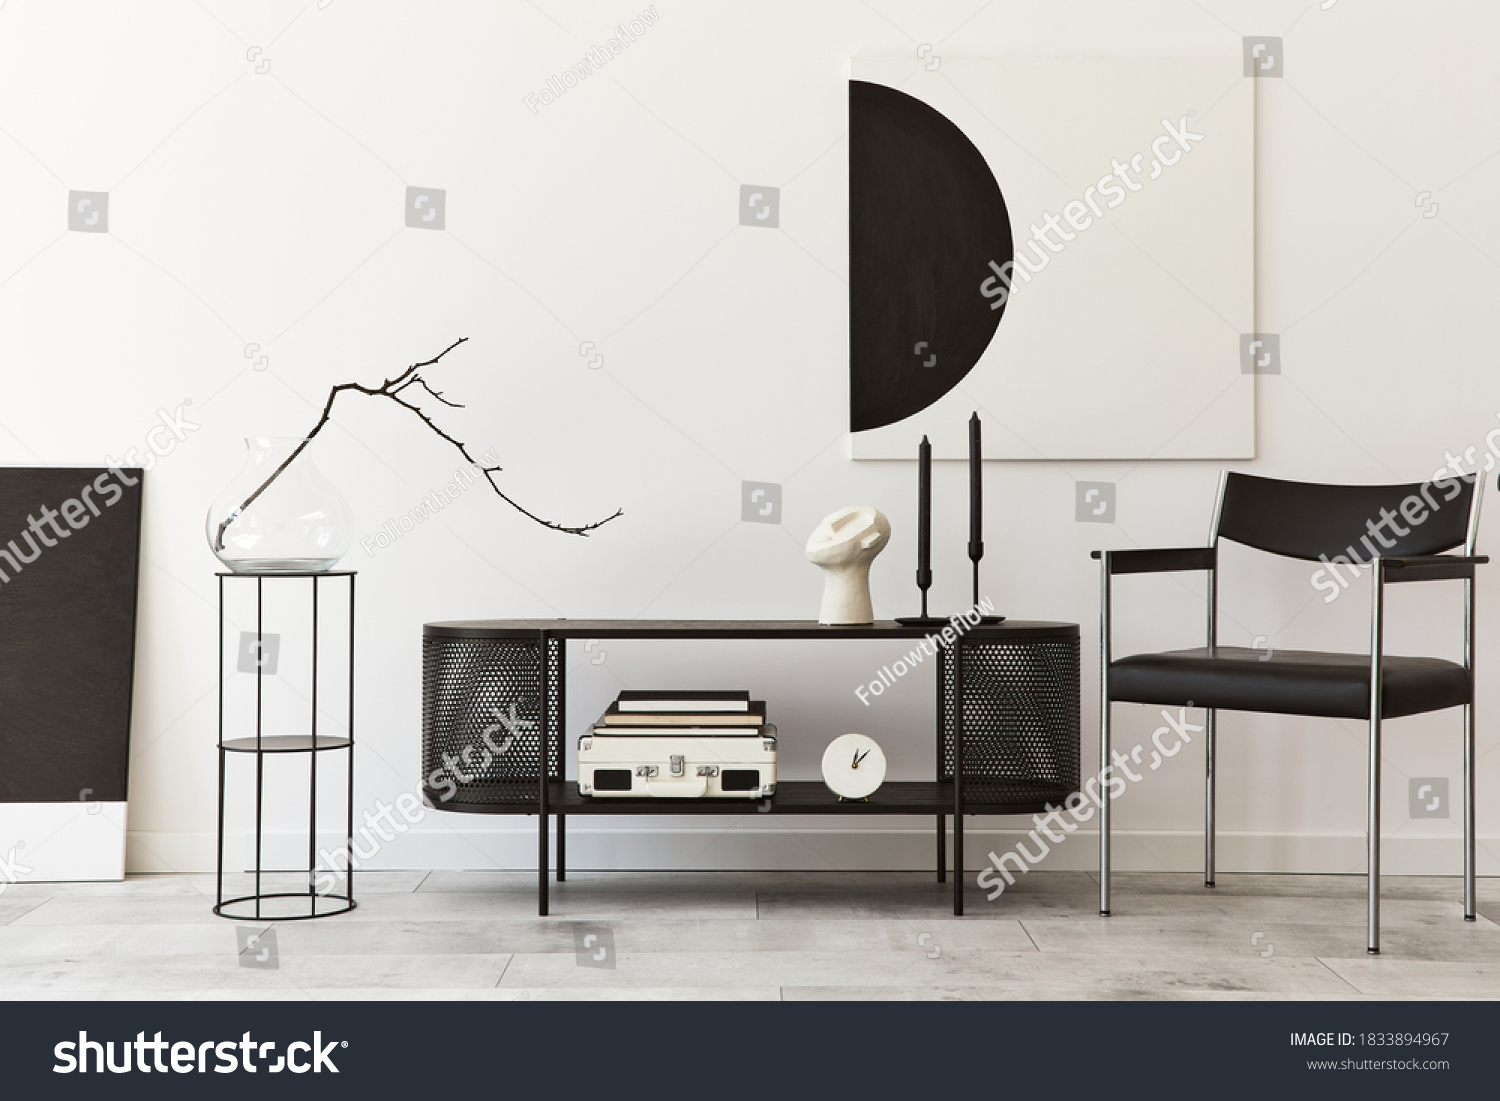 Interior design of modern living room with black stylish commode, chair, mock up art paintings, lamp, book, candlestick, decorations and elegant accessories in home decor. Template. #1833894967